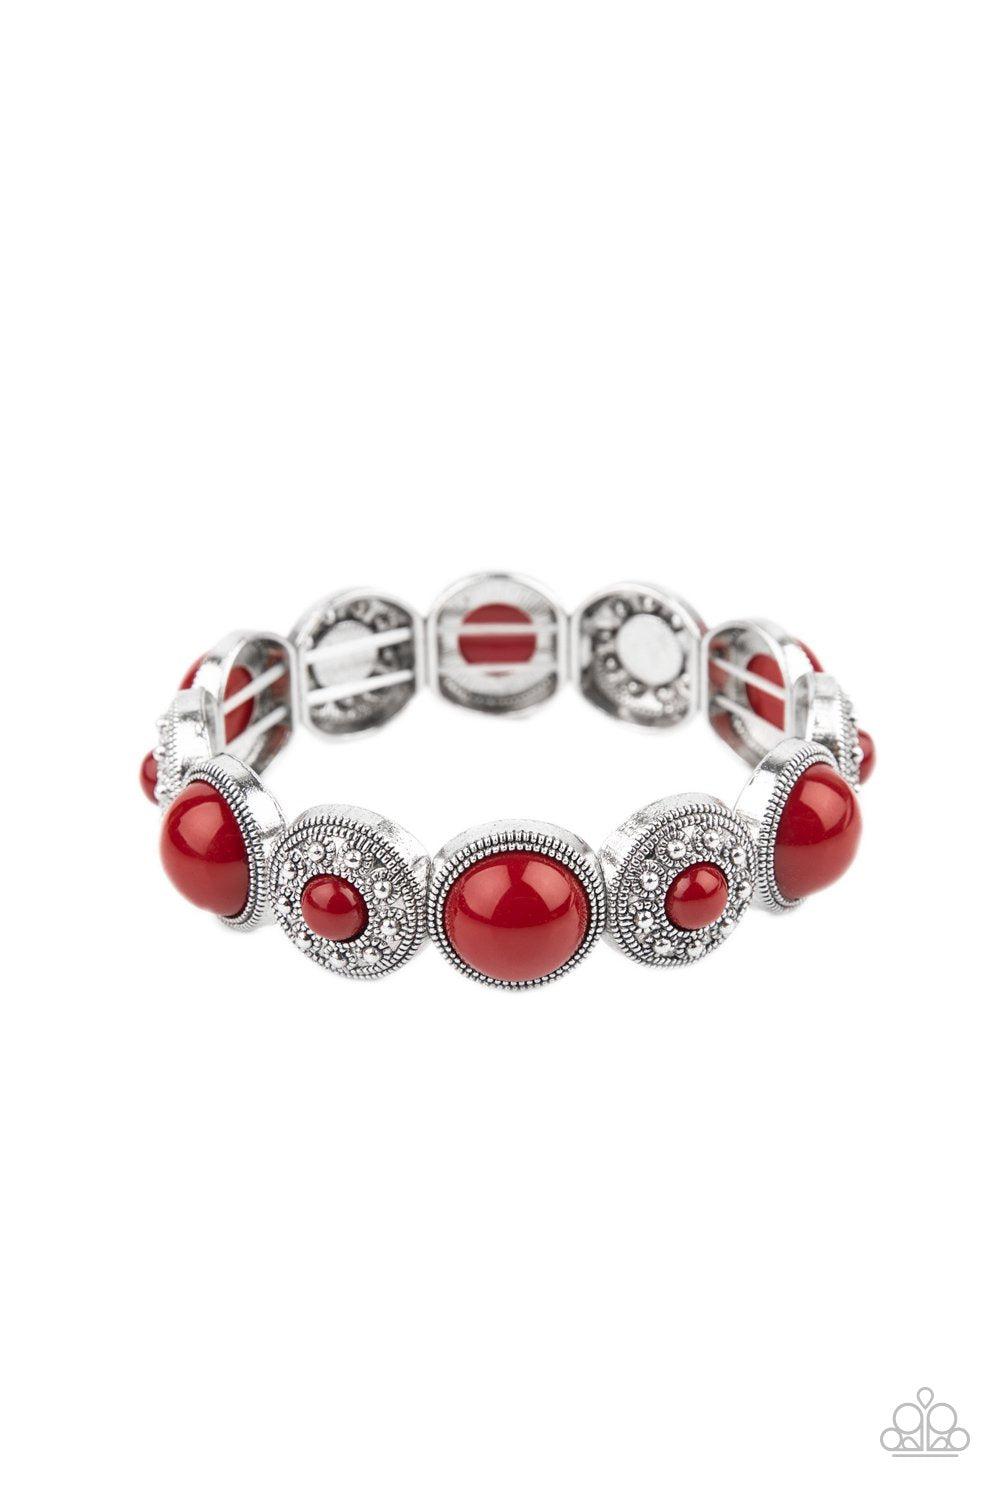 Garden Flair Red and Silver Bracelet - Paparazzi Accessories - lightbox -CarasShop.com - $5 Jewelry by Cara Jewels